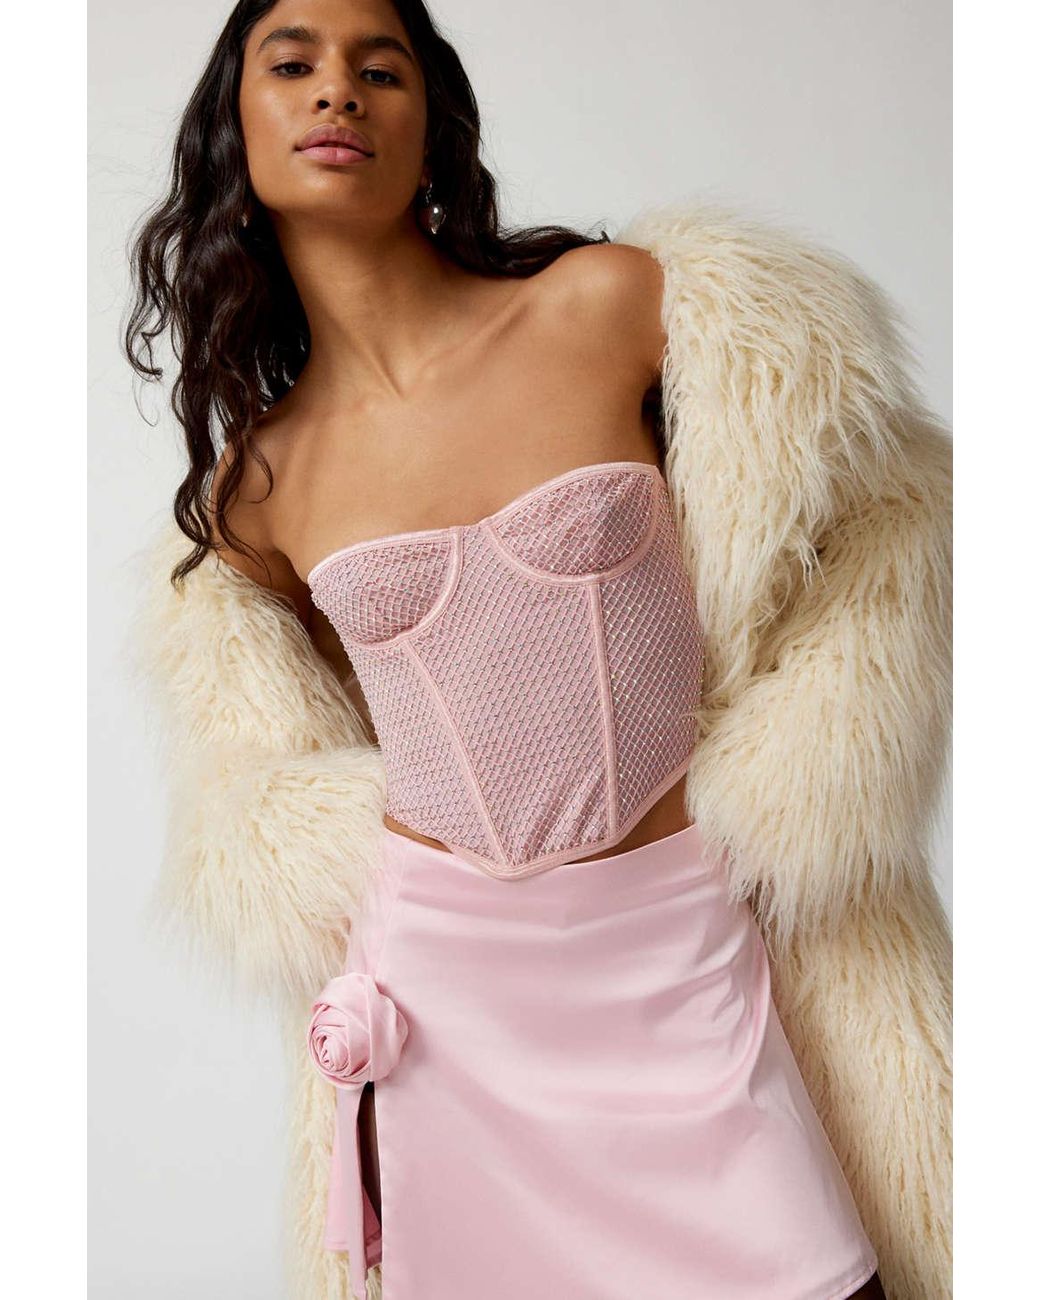 https://cdna.lystit.com/1040/1300/n/photos/urbanoutfitters/57b1c20c/out-from-under-Pink-Donatella-Diamante-Corset-In-Pinkat-Urban-Outfitters.jpeg